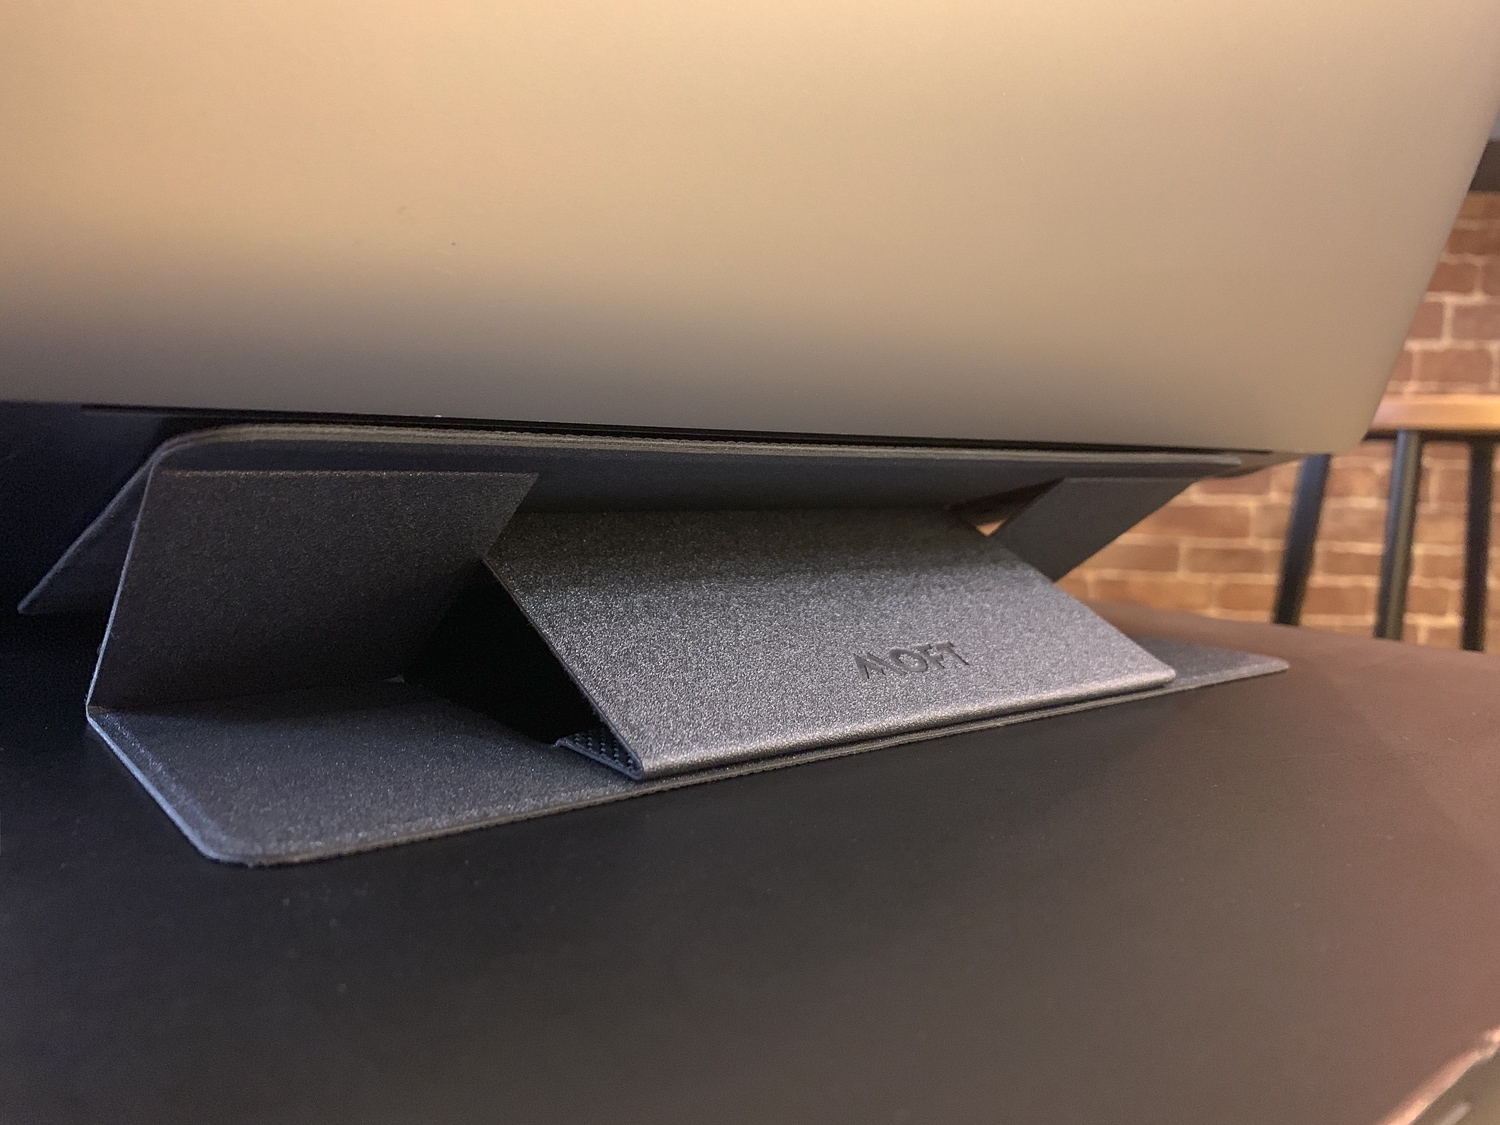 Change the angles of the laptop stand to suit you needs.